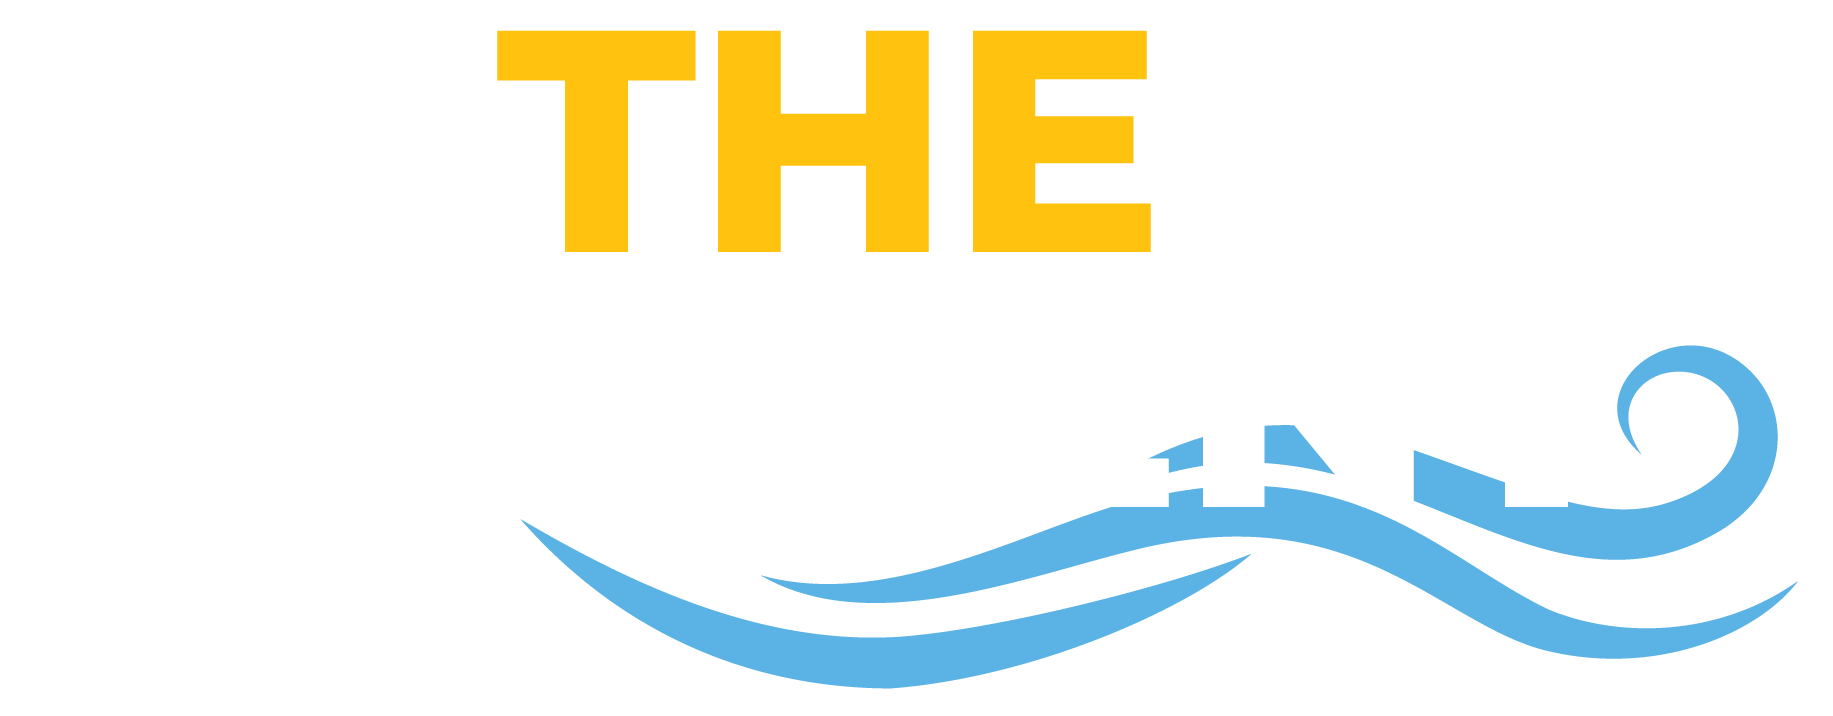 Gold and White "The Current" text with a wave symbol